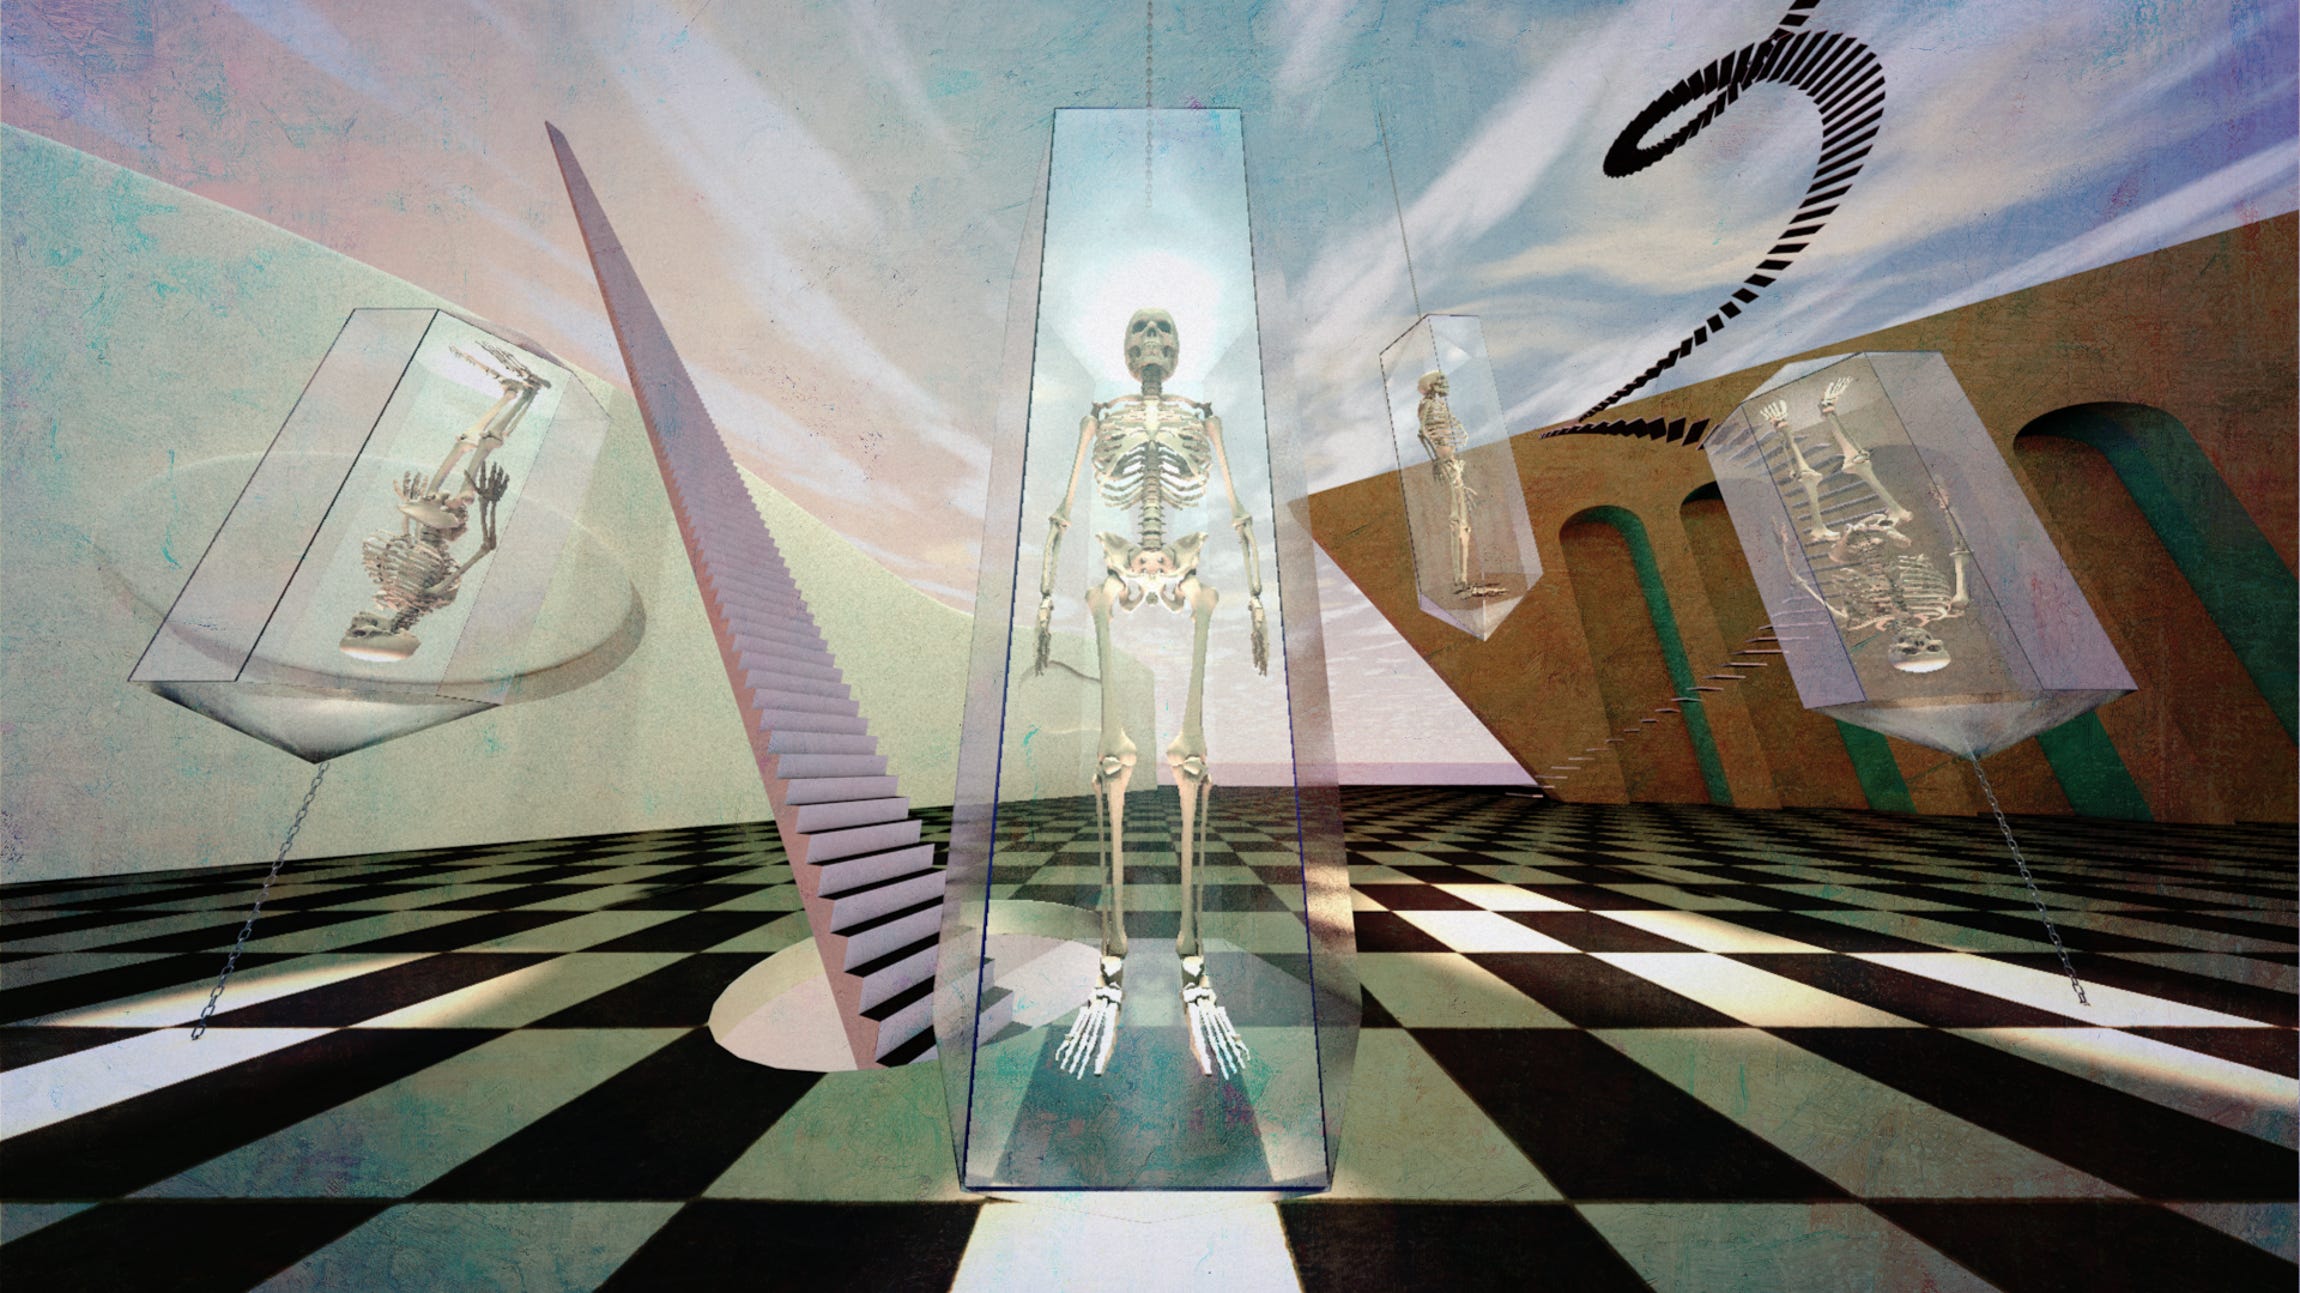 A human skeleton in a glass case in a surreal take on a musem.